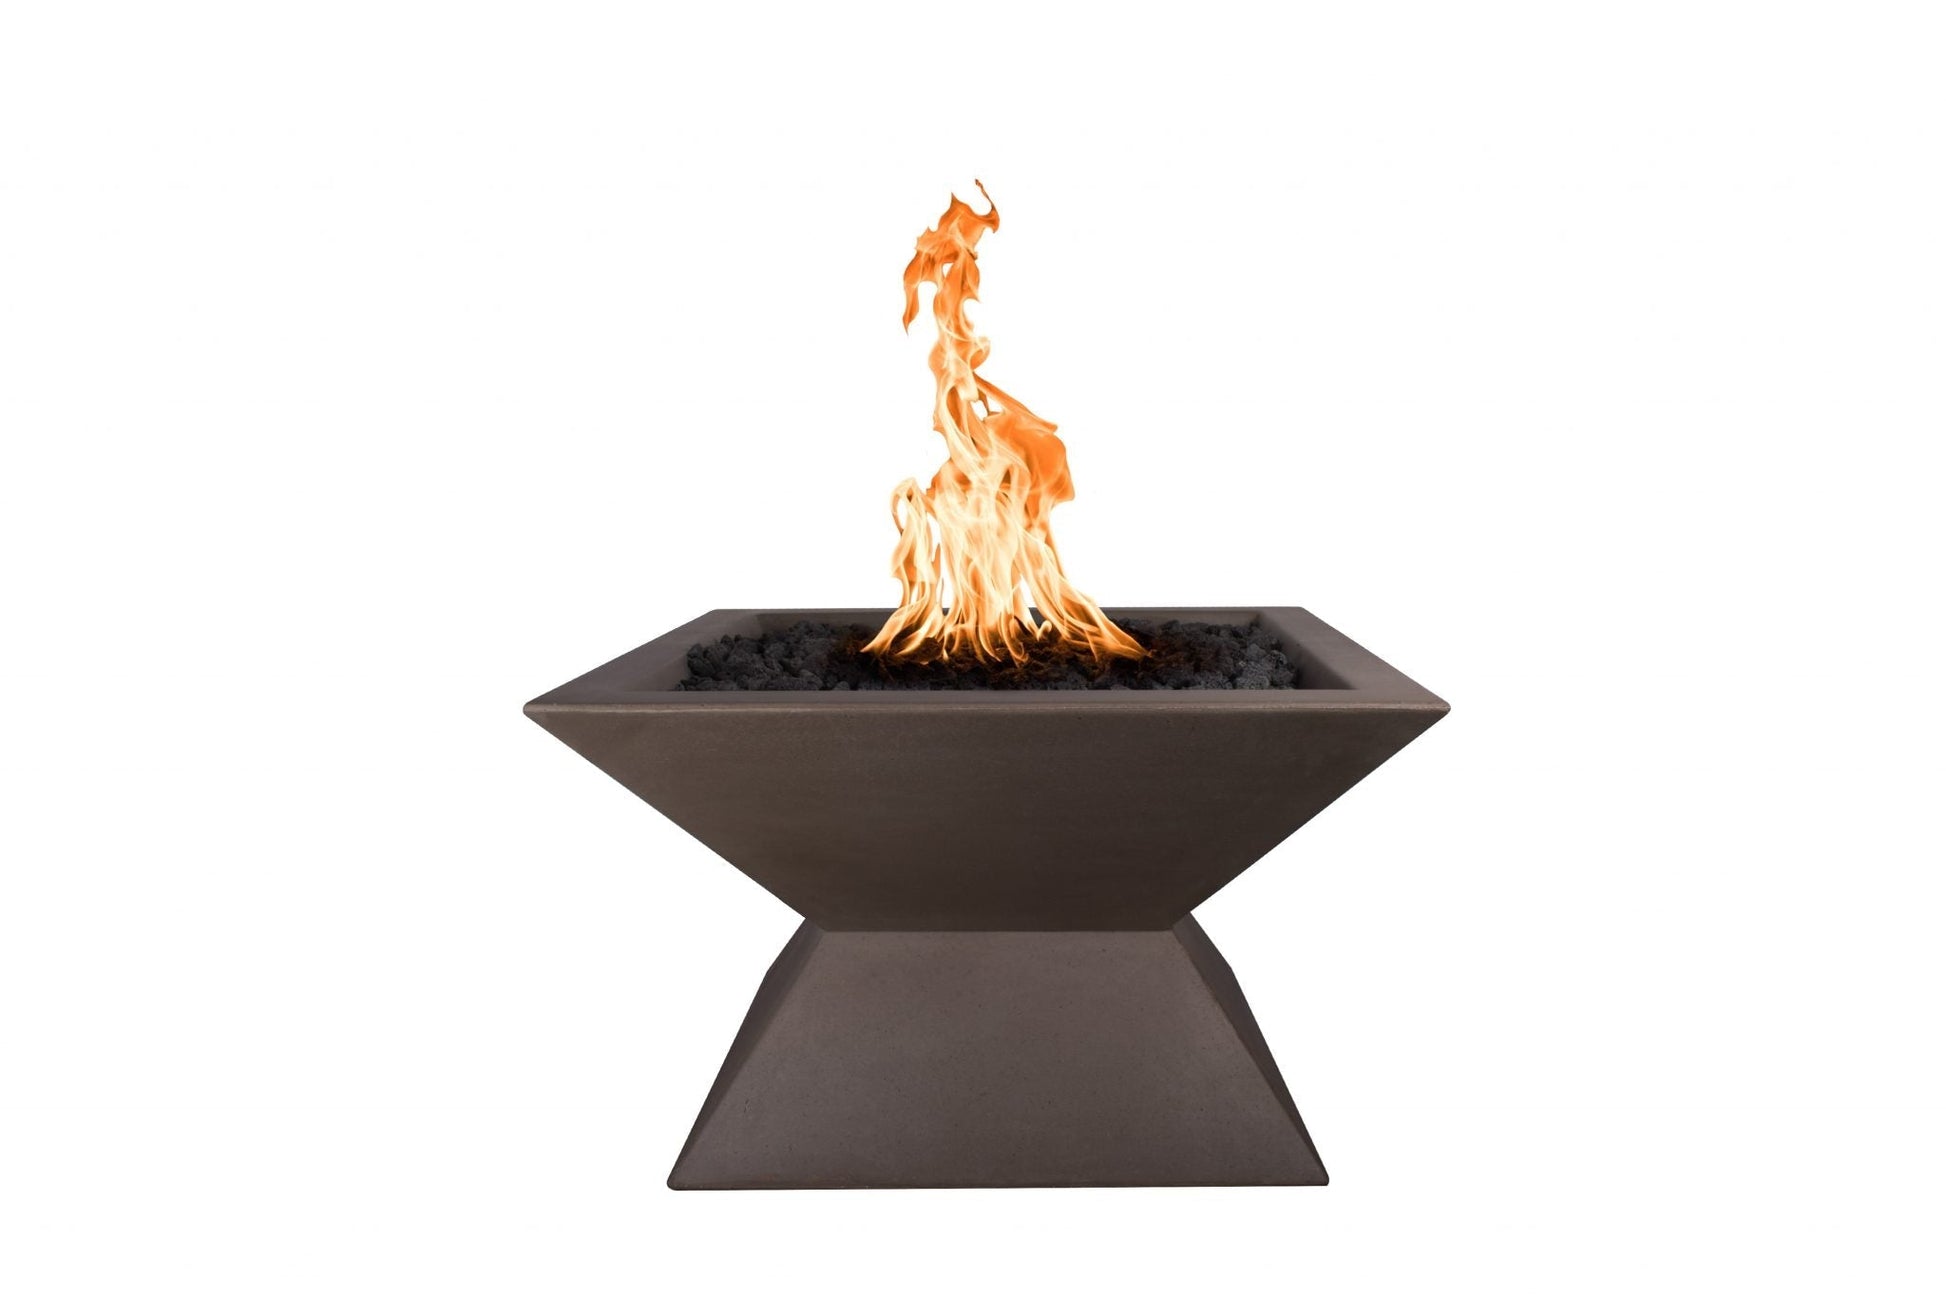 The Outdoor Plus Square Uxmal 30" Metallic Copper GFRC Concrete Natural Gas Fire Pit with Match Lit Ignition